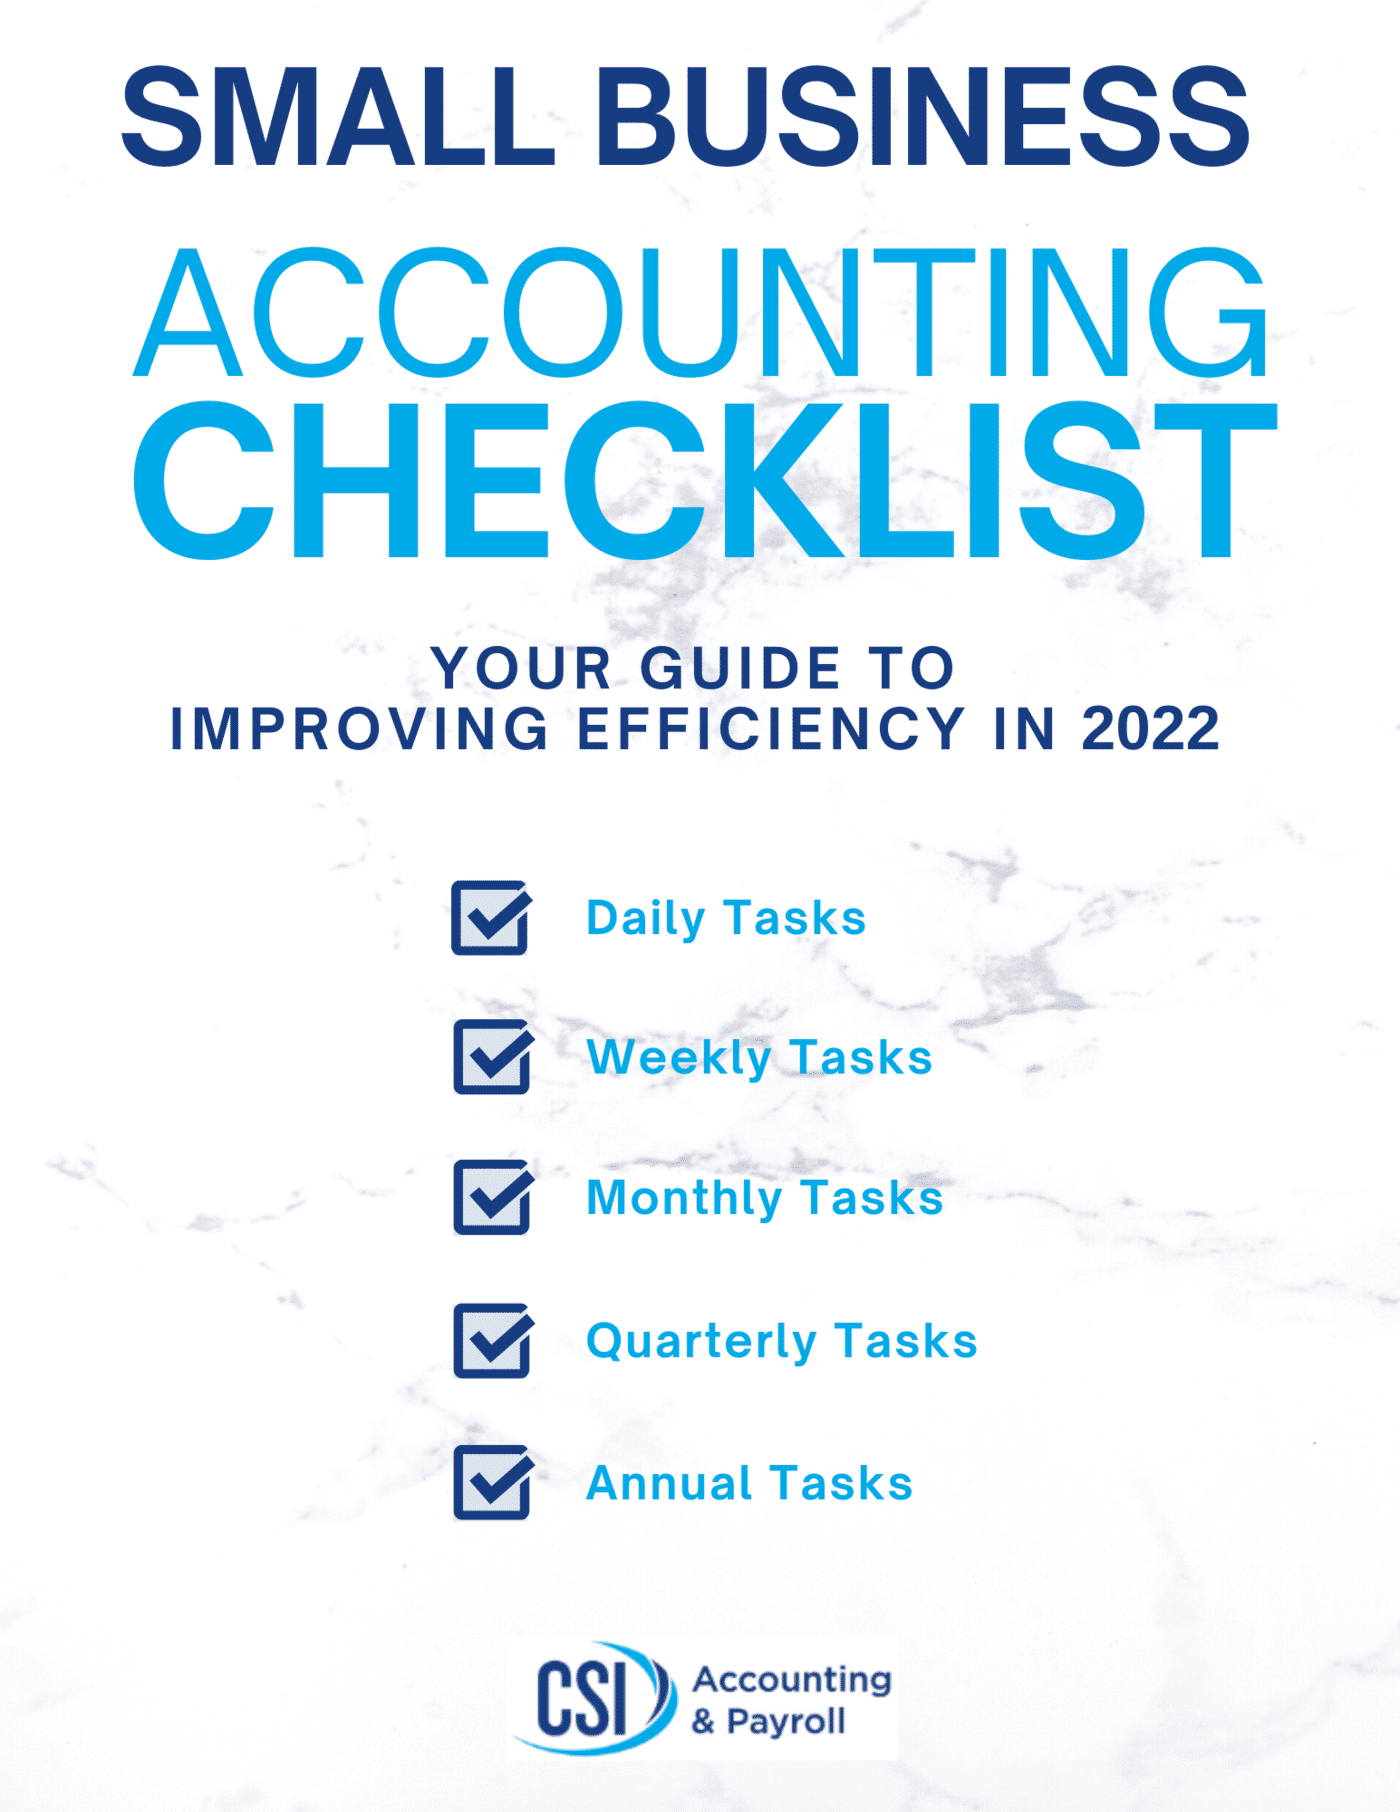 Small Business Accounting Checklist (REMADE FOR 2022)